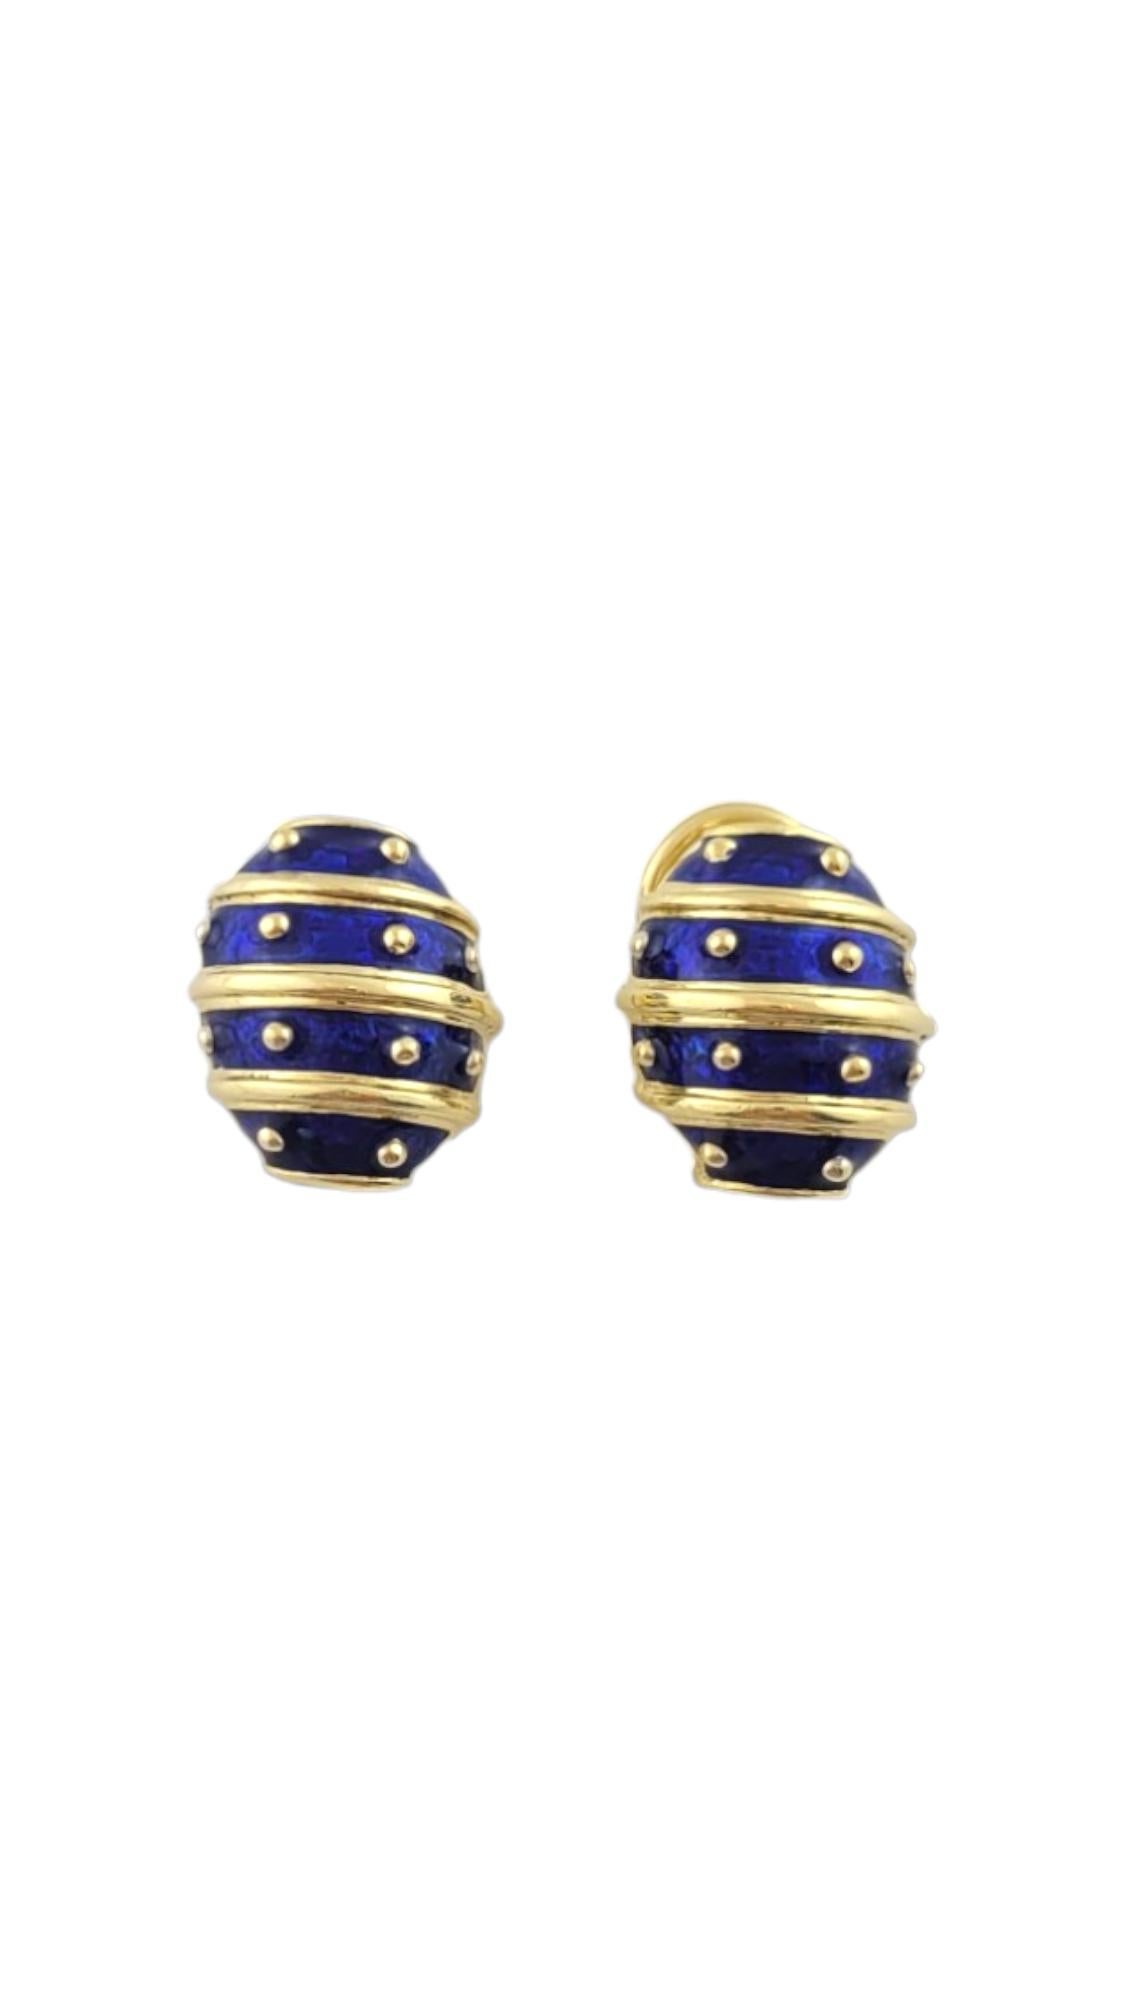 Hidalgo 18K Yellow Gold Blue Enamel Earrings

Omega back earrings in 18 karat yellow gold with blue enamel design.

Hallmark: 750

Weight: 16 g/ 10.3 dwt.

Measurements: 16.6 mm X 13.07 mm

Very good condition, professionally polished.

Will come